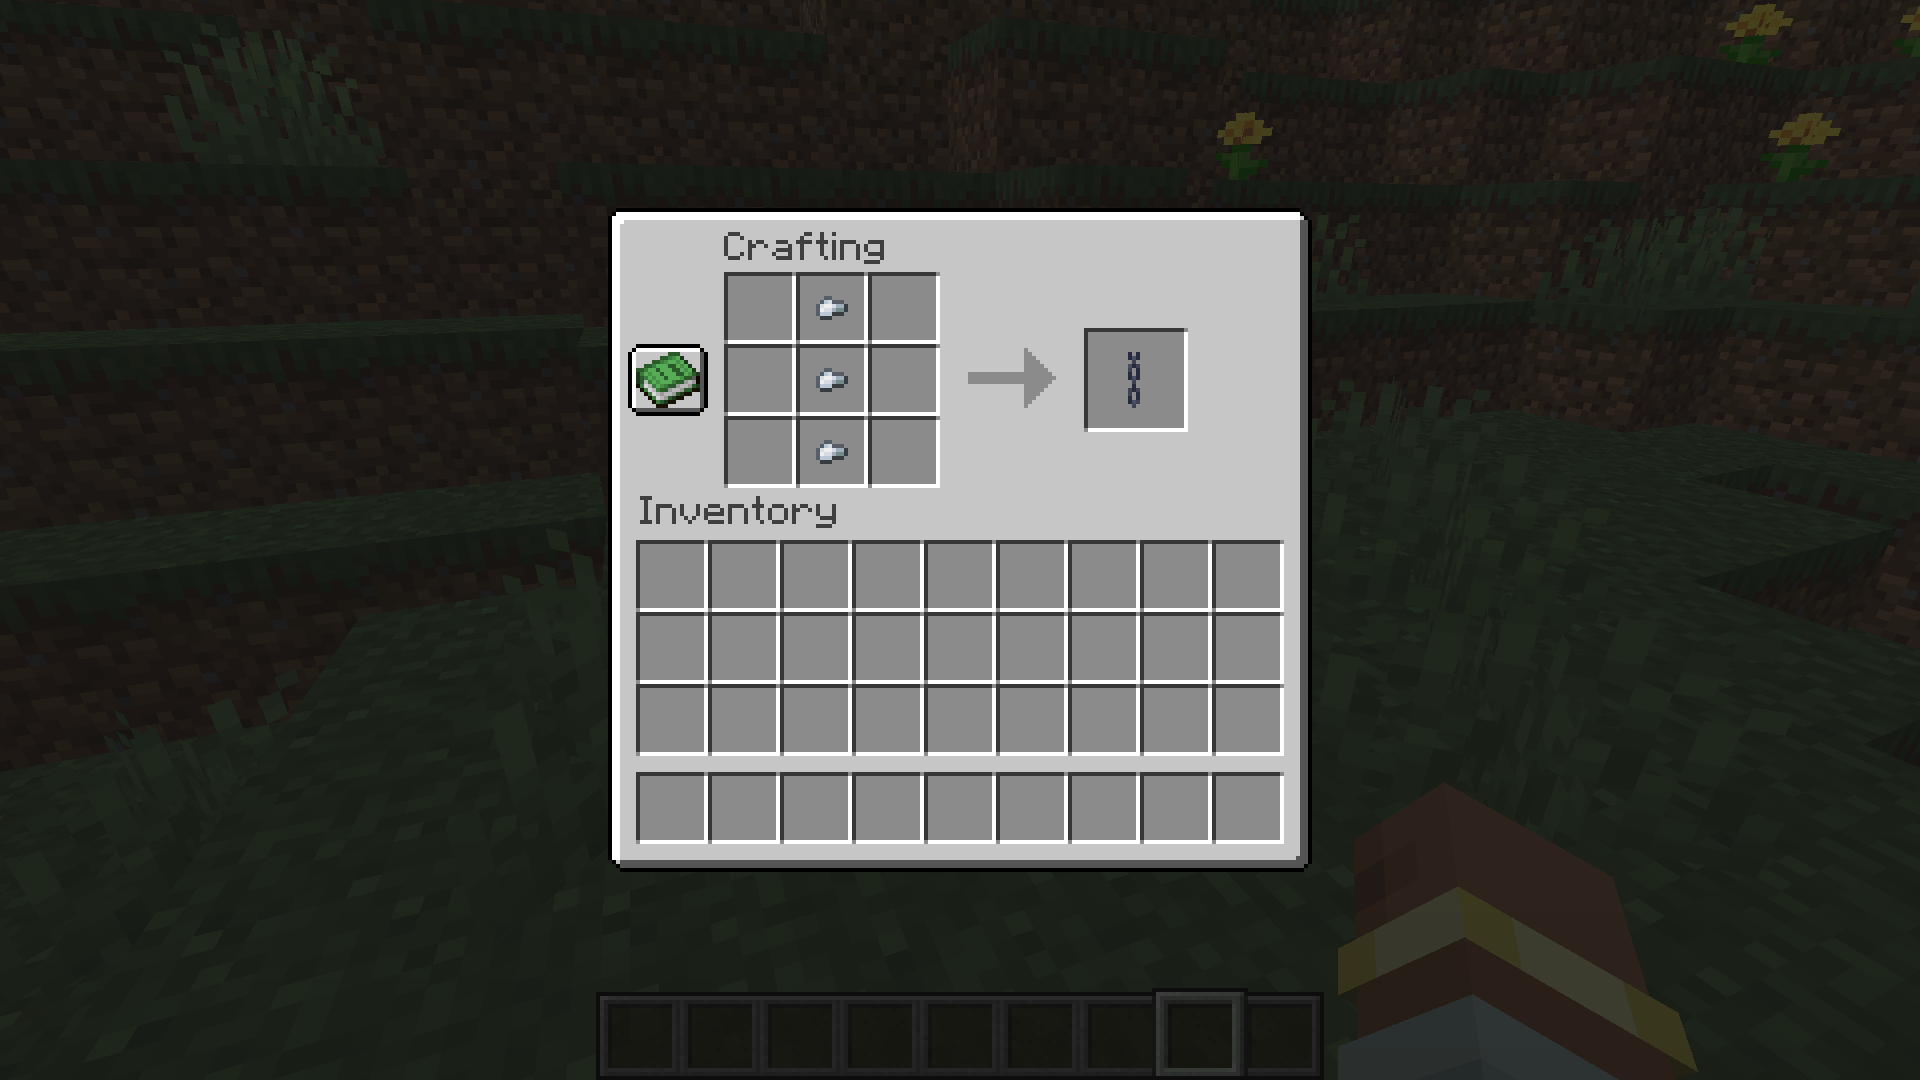 The new chain recipe! Works on all 3 sides of the crafting grid!